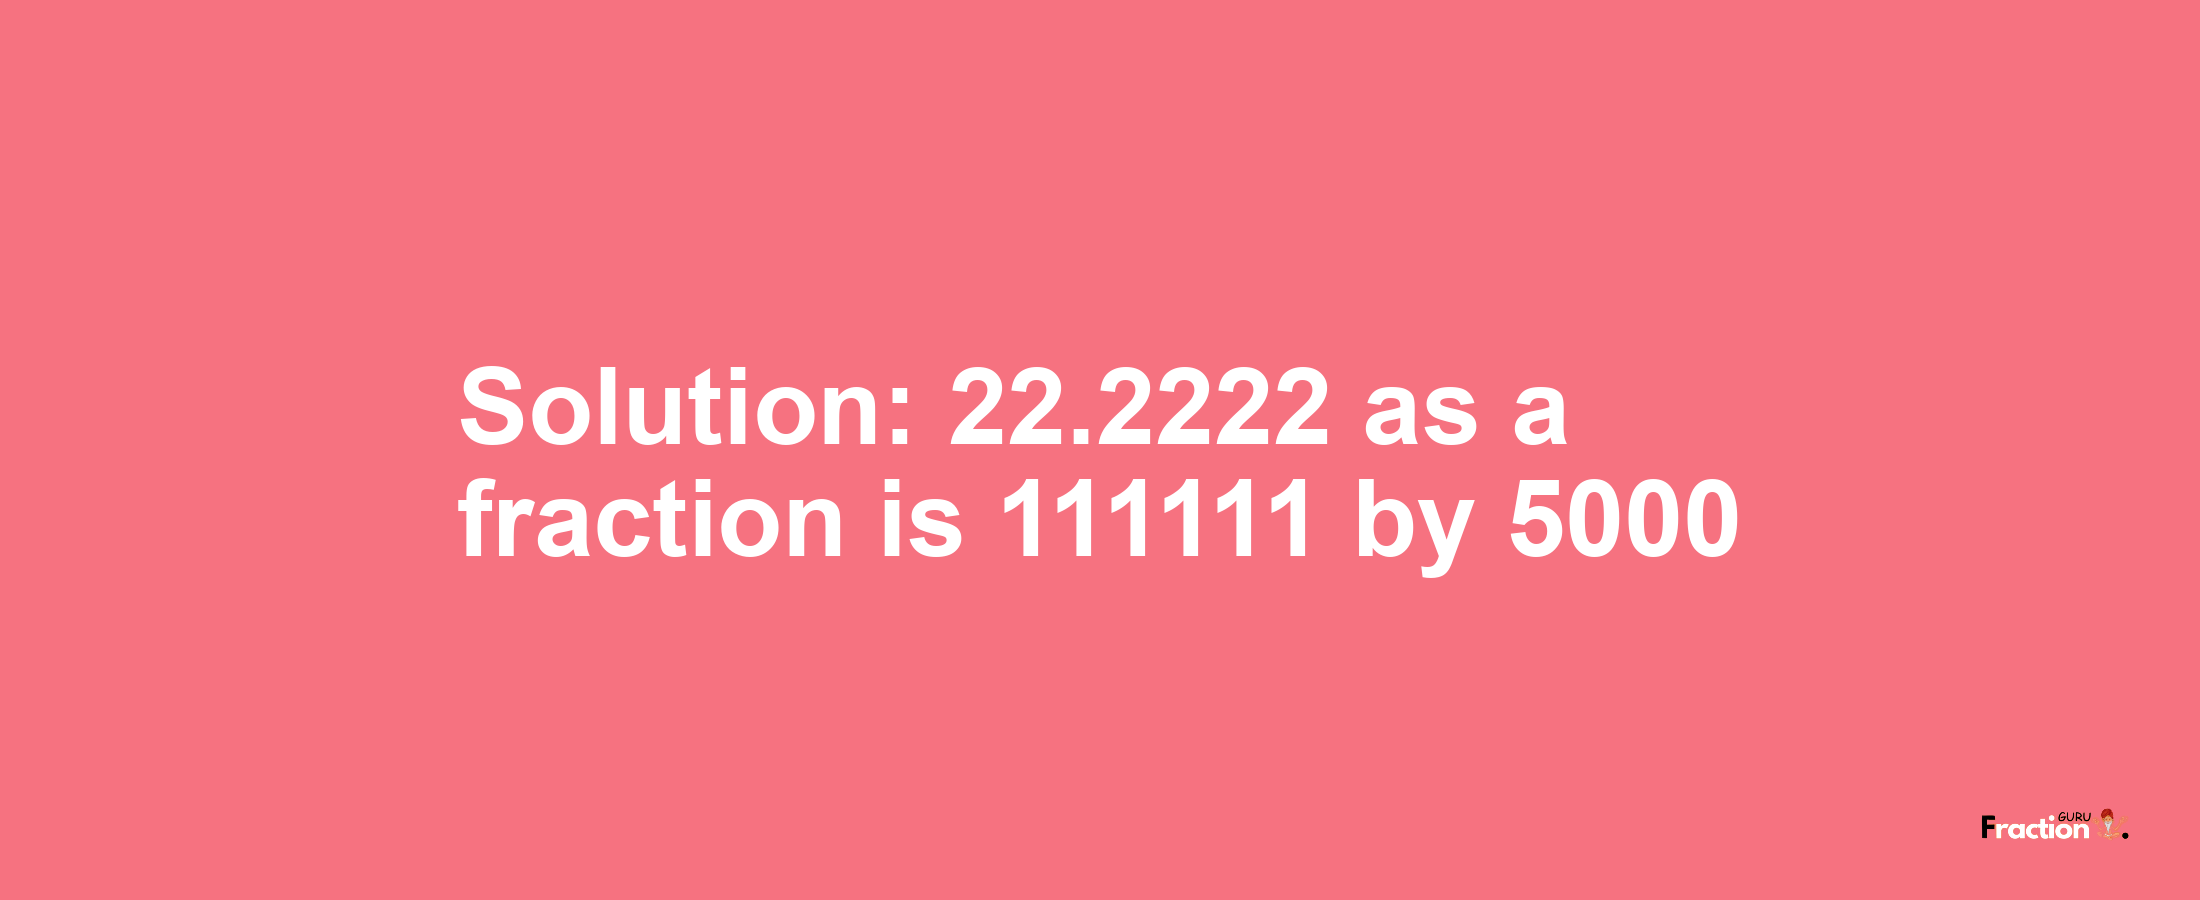 Solution:22.2222 as a fraction is 111111/5000